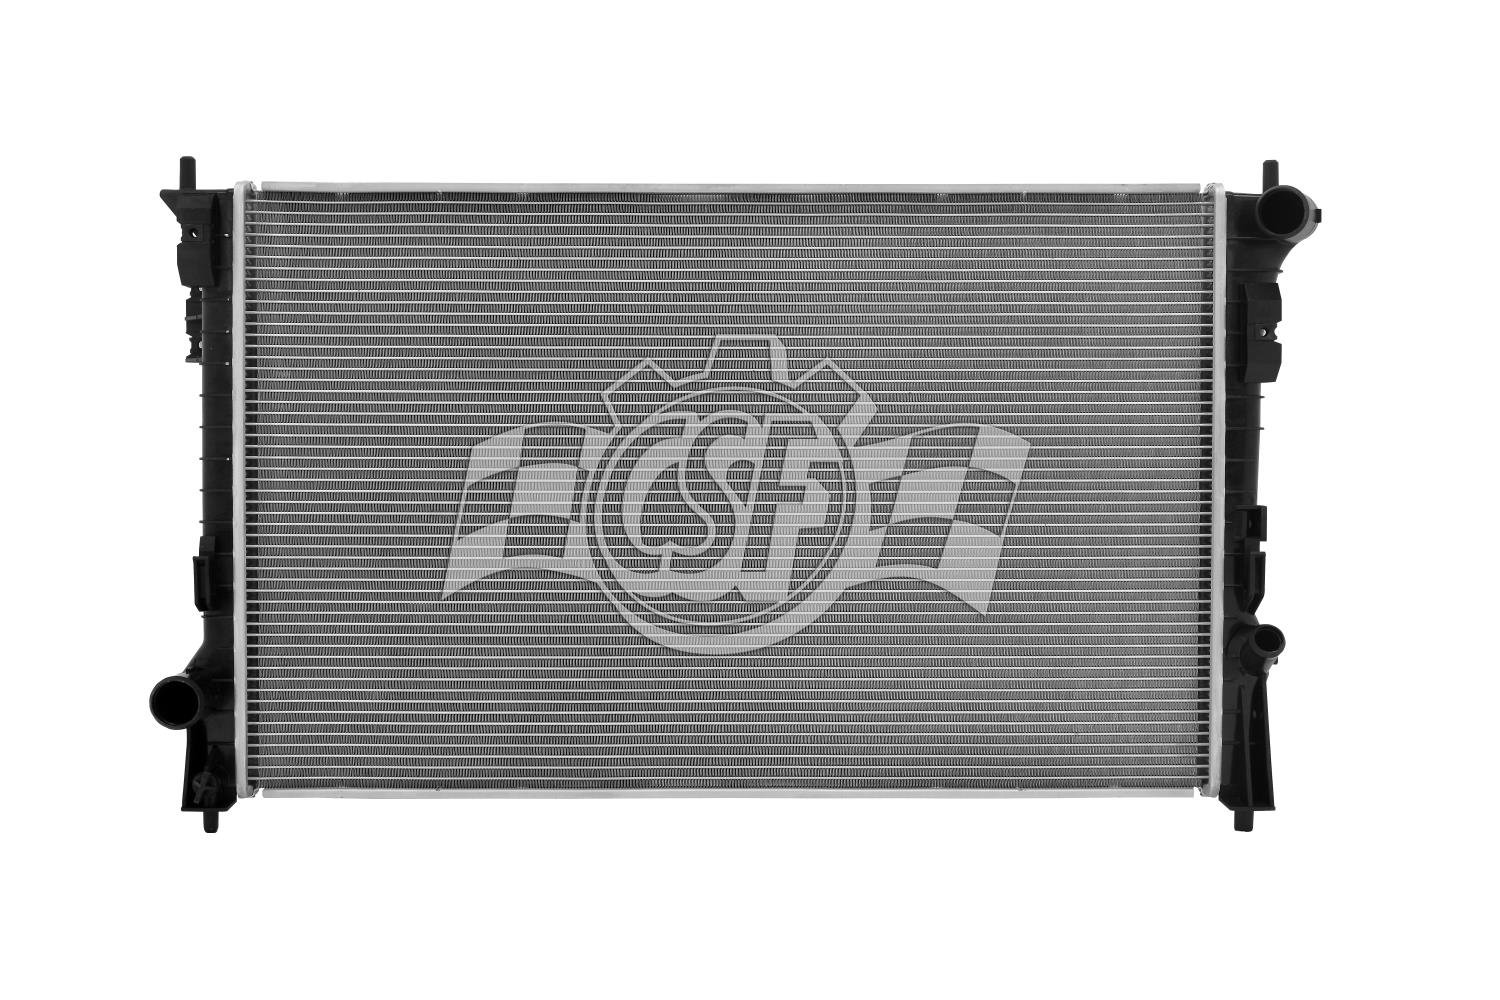 OE-Style 1-Row Radiator, Lincoln MKX, Ford Edge, Ford